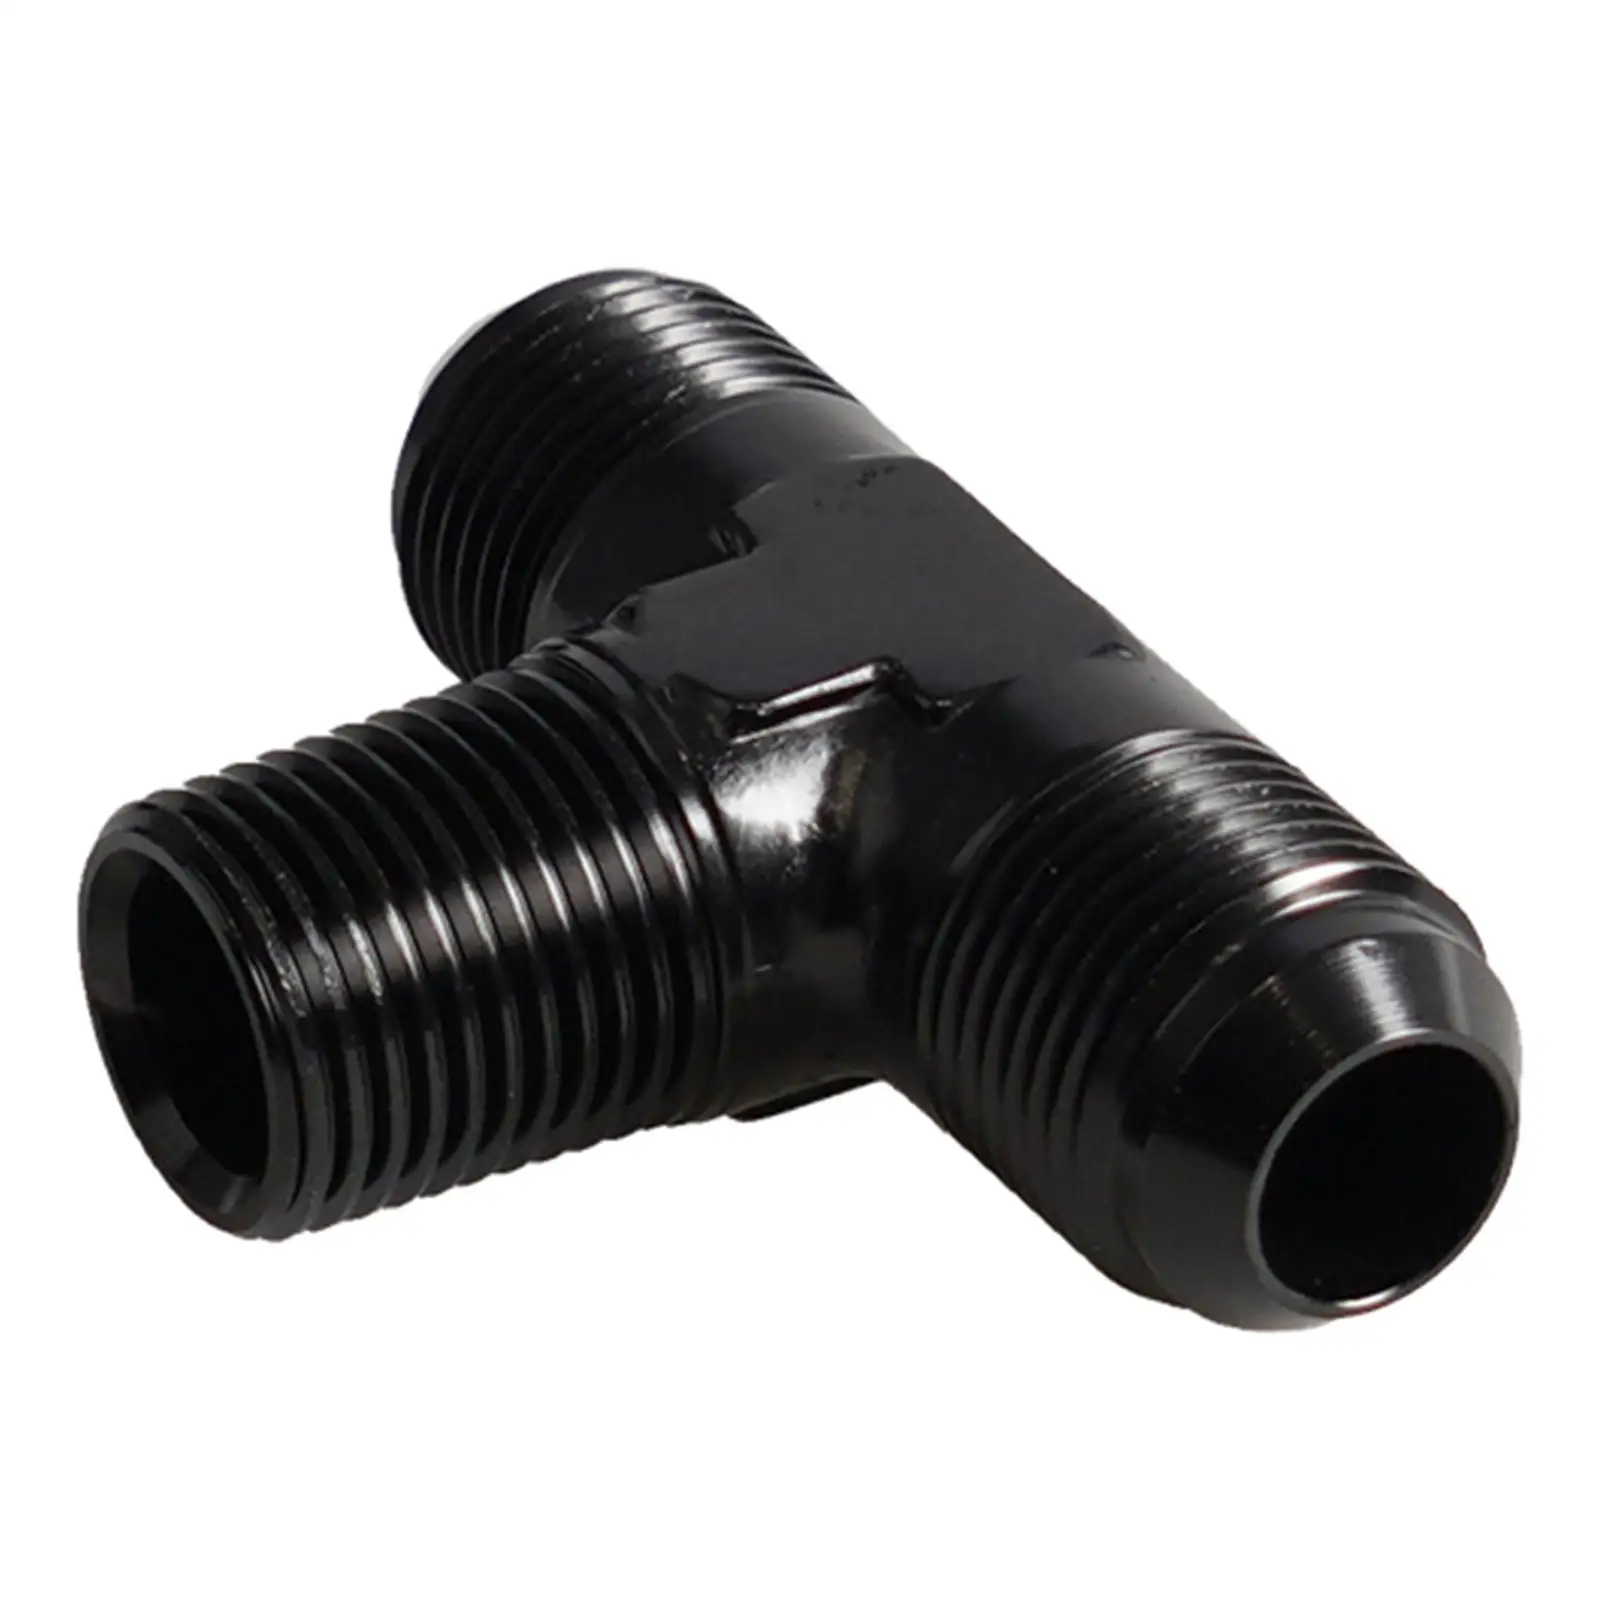 AN3 Male to 1/8inch NPT Hose Tee Adapter Connector Fitting Black on Side Branch Tee Replacement High Premium